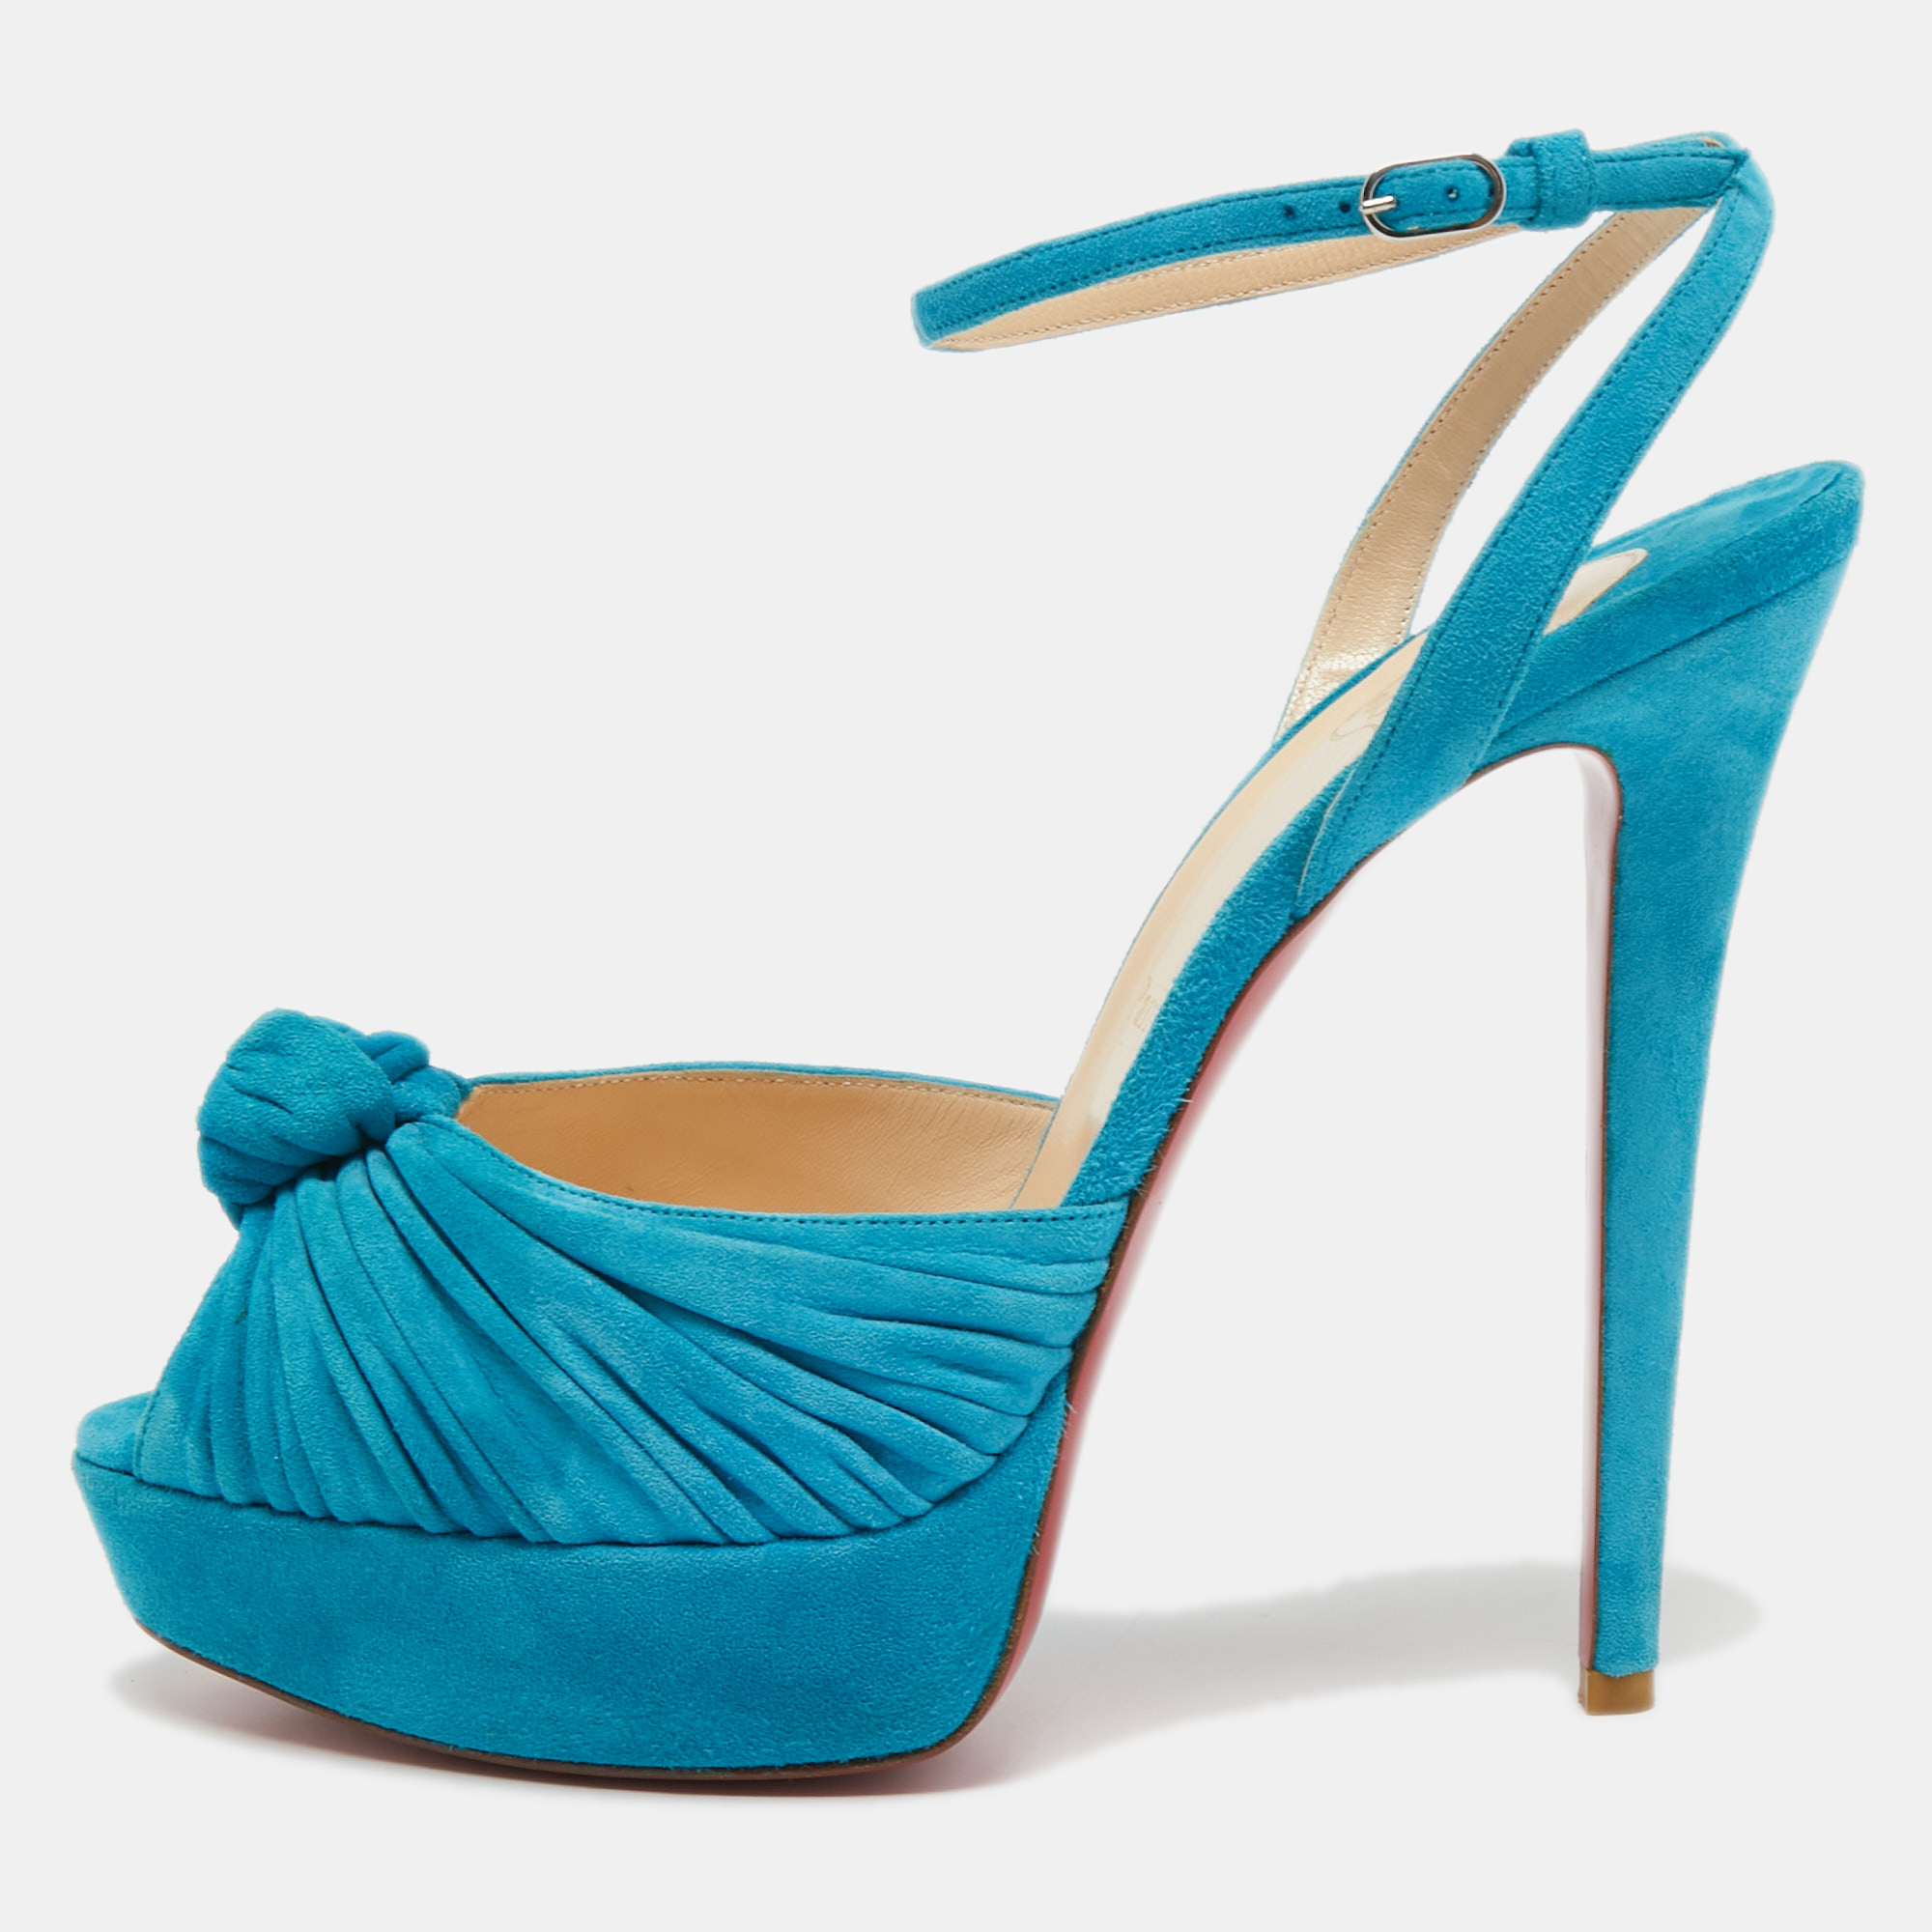 Christian louboutin blue knotted suede greissimo ankle strap sandals size 40.5